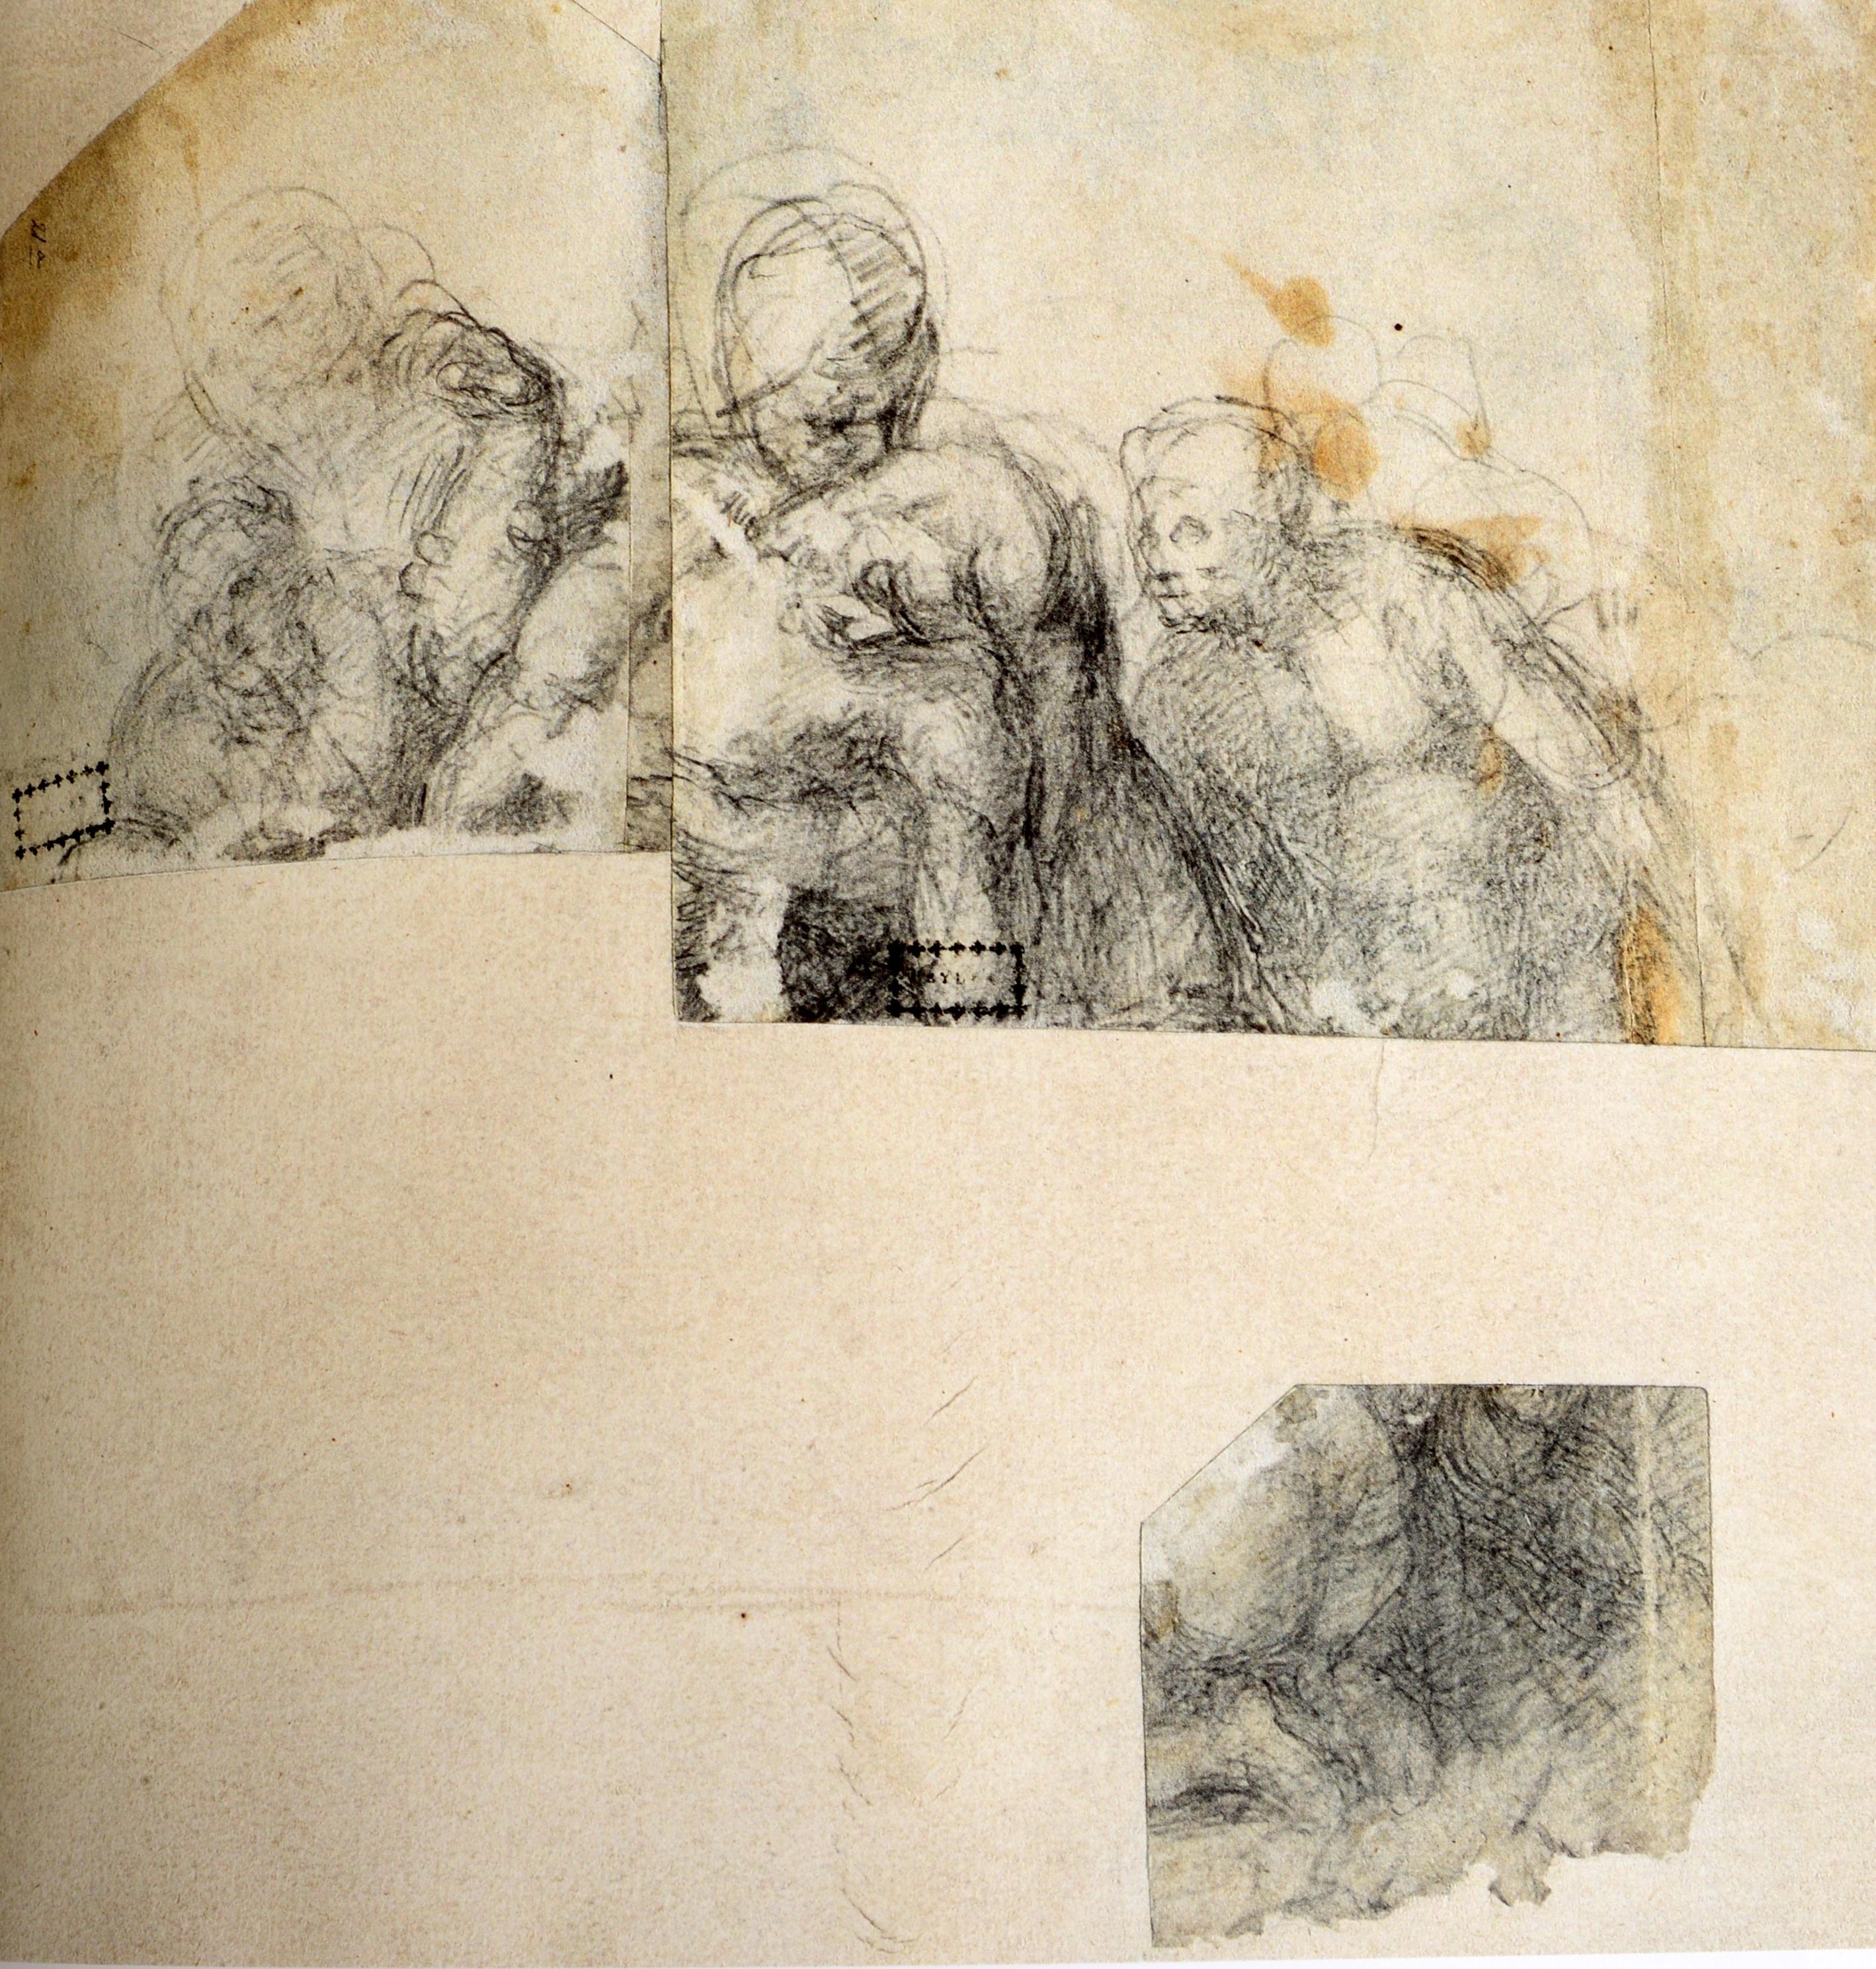 Austrian Michelangelo. The Drawings of a Genius, 1st Ed Exhibition Catalog For Sale